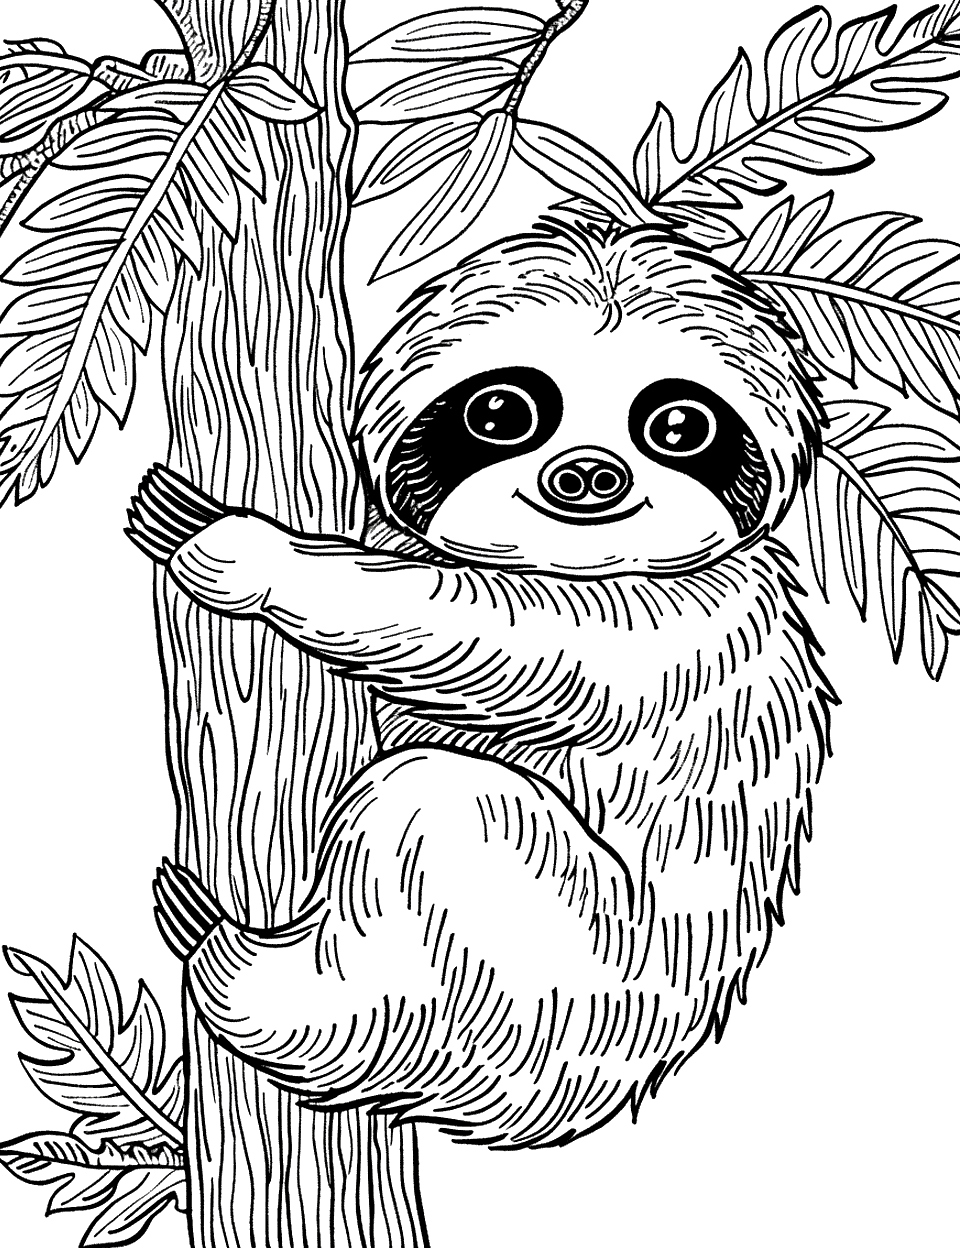 Young Sloth Learning to Climb Coloring Page - A young sloth with an expression of determination, clumsily climbing a small tree.